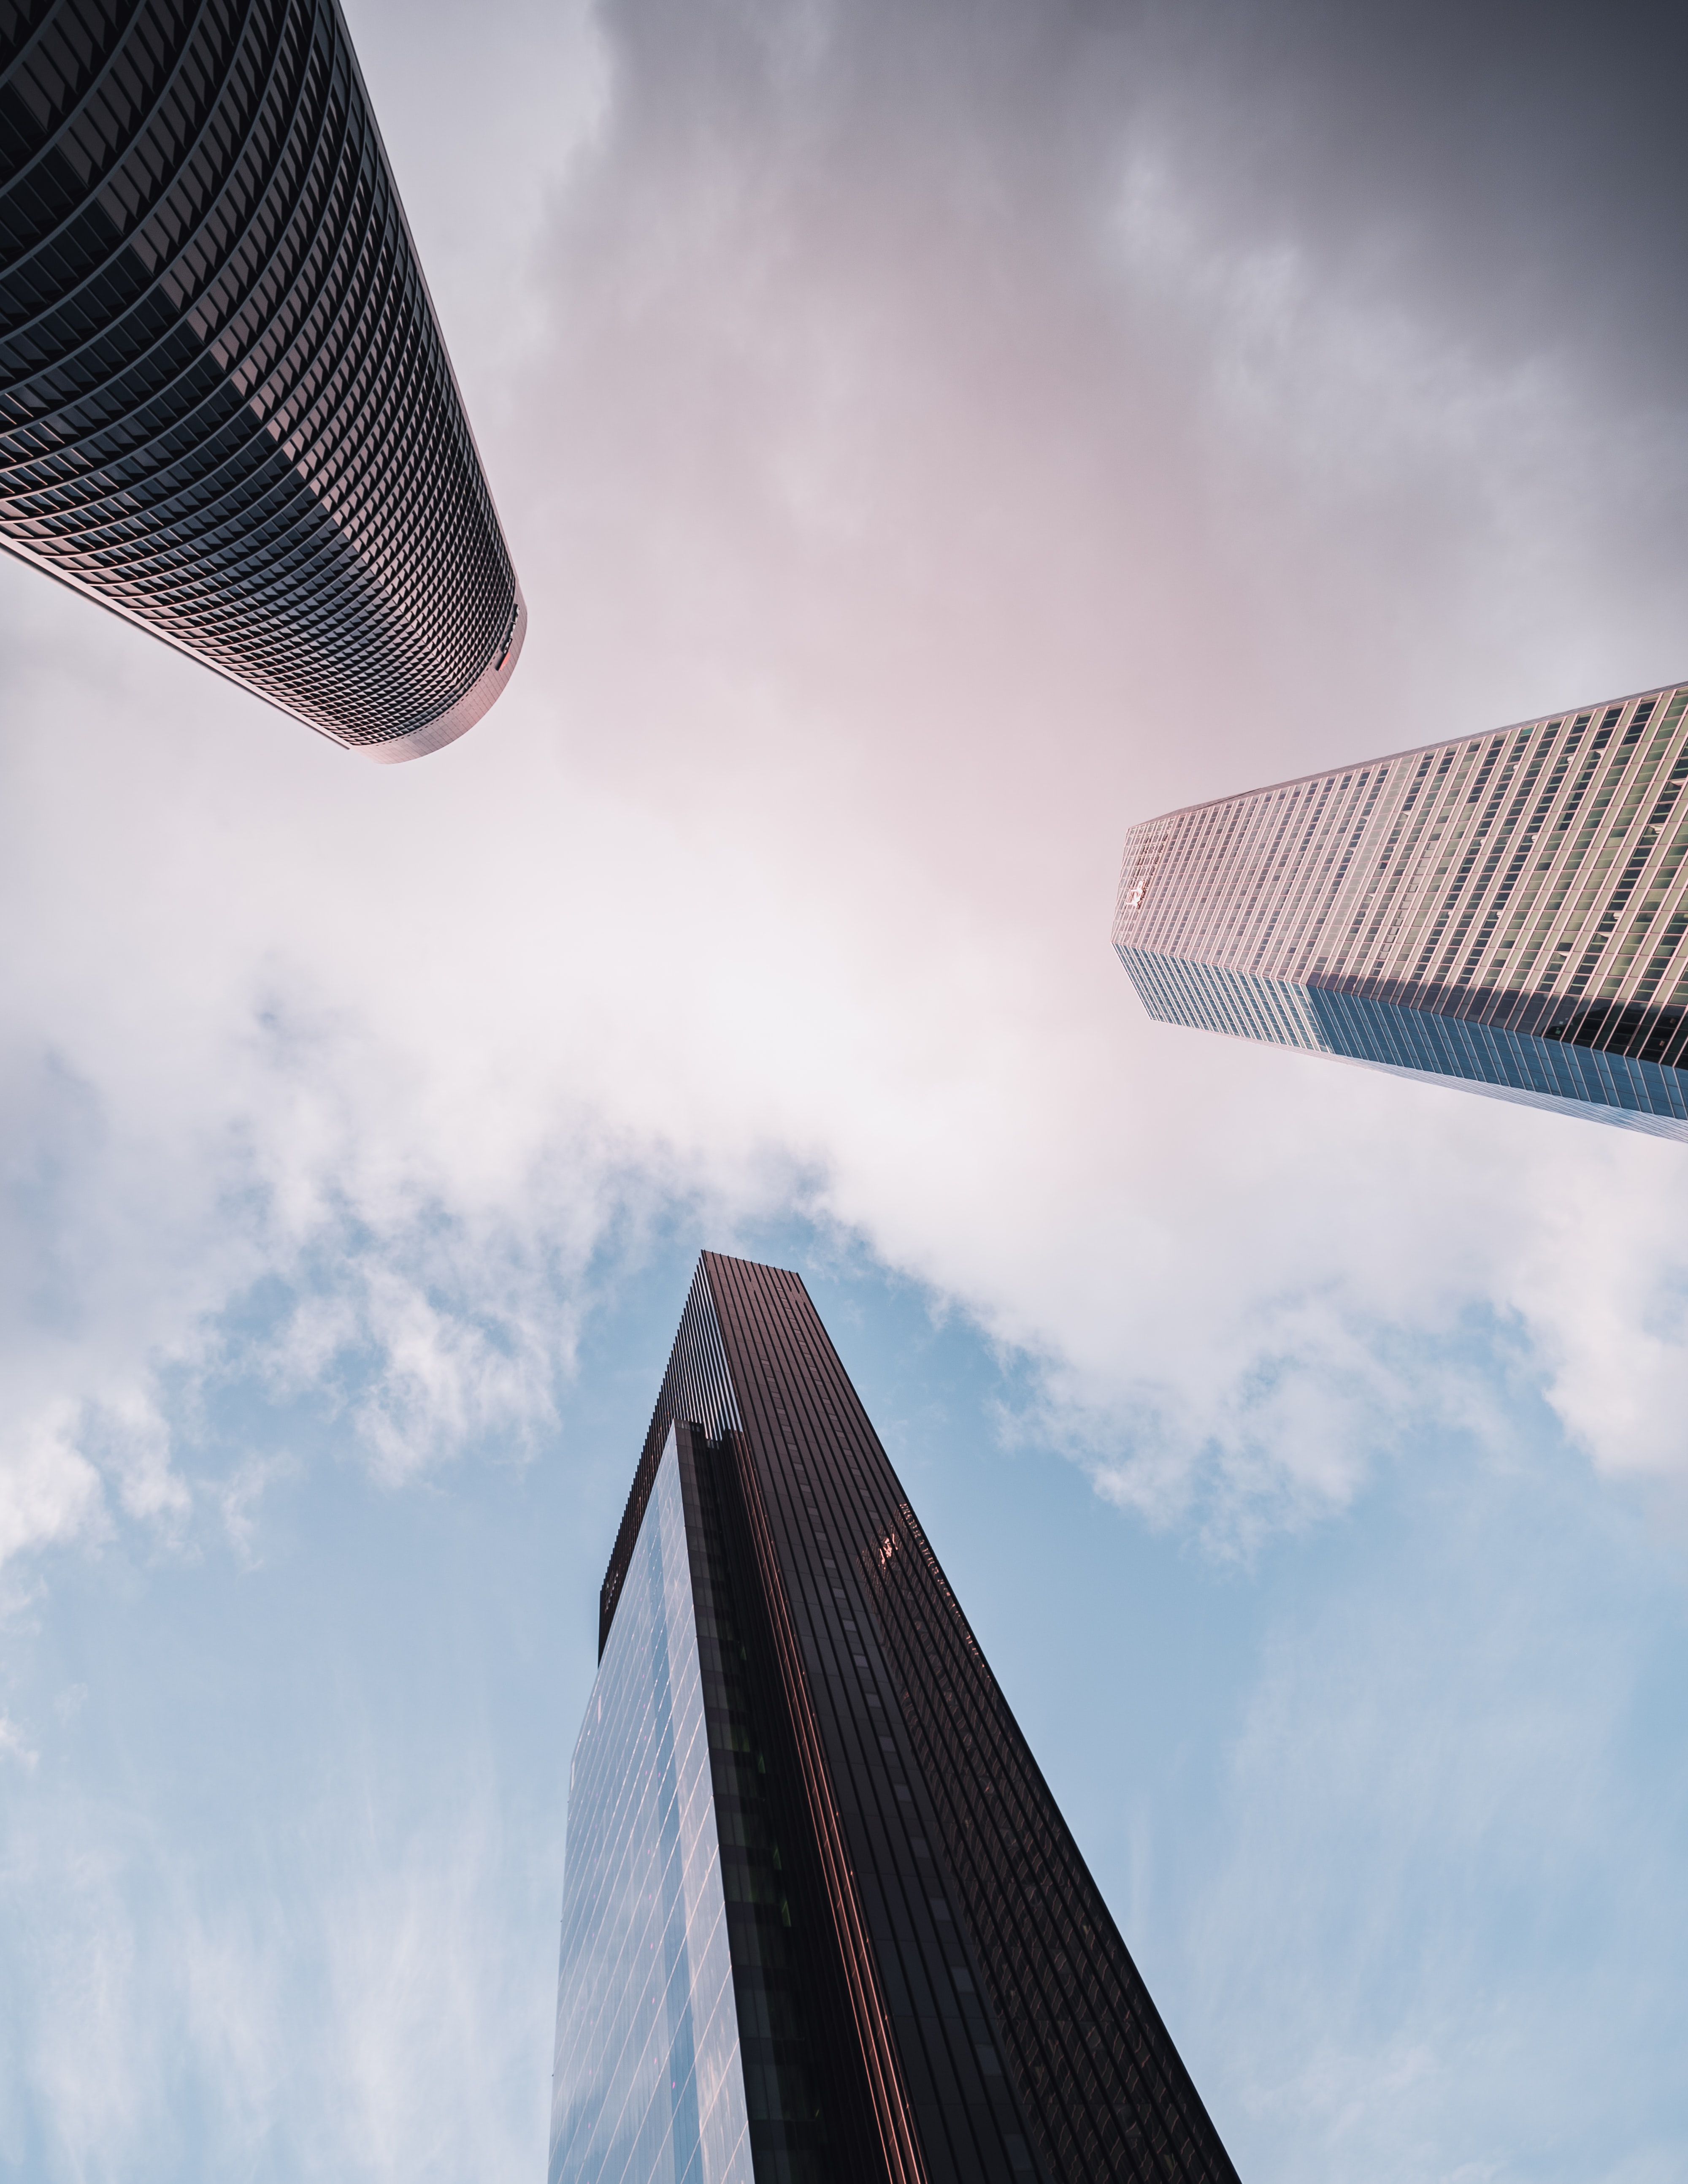 sky, architecture, building, miscellanea, miscellaneous, skyscrapers, tower, towers 4K Ultra